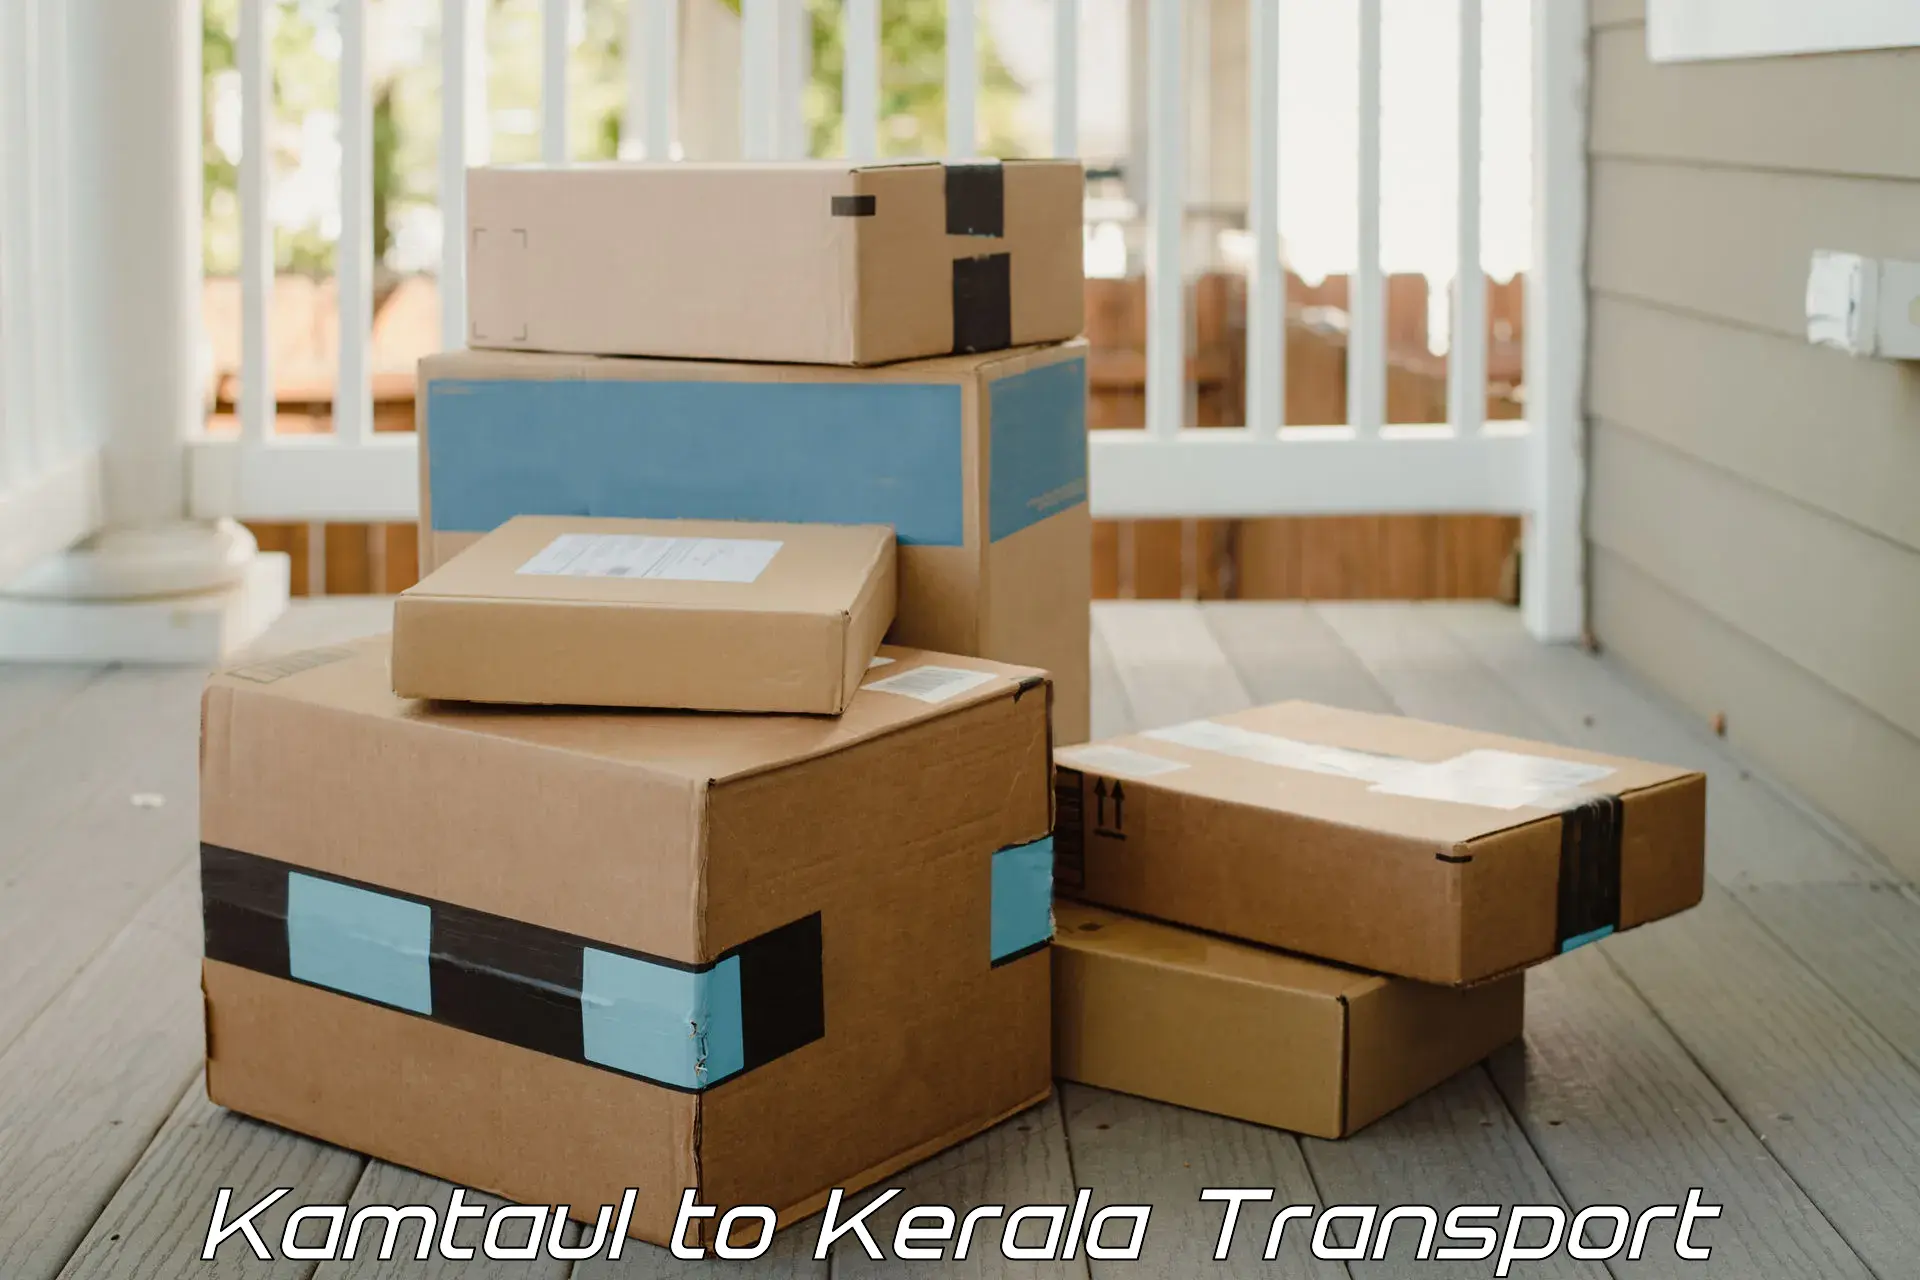 Goods delivery service Kamtaul to Chungathara